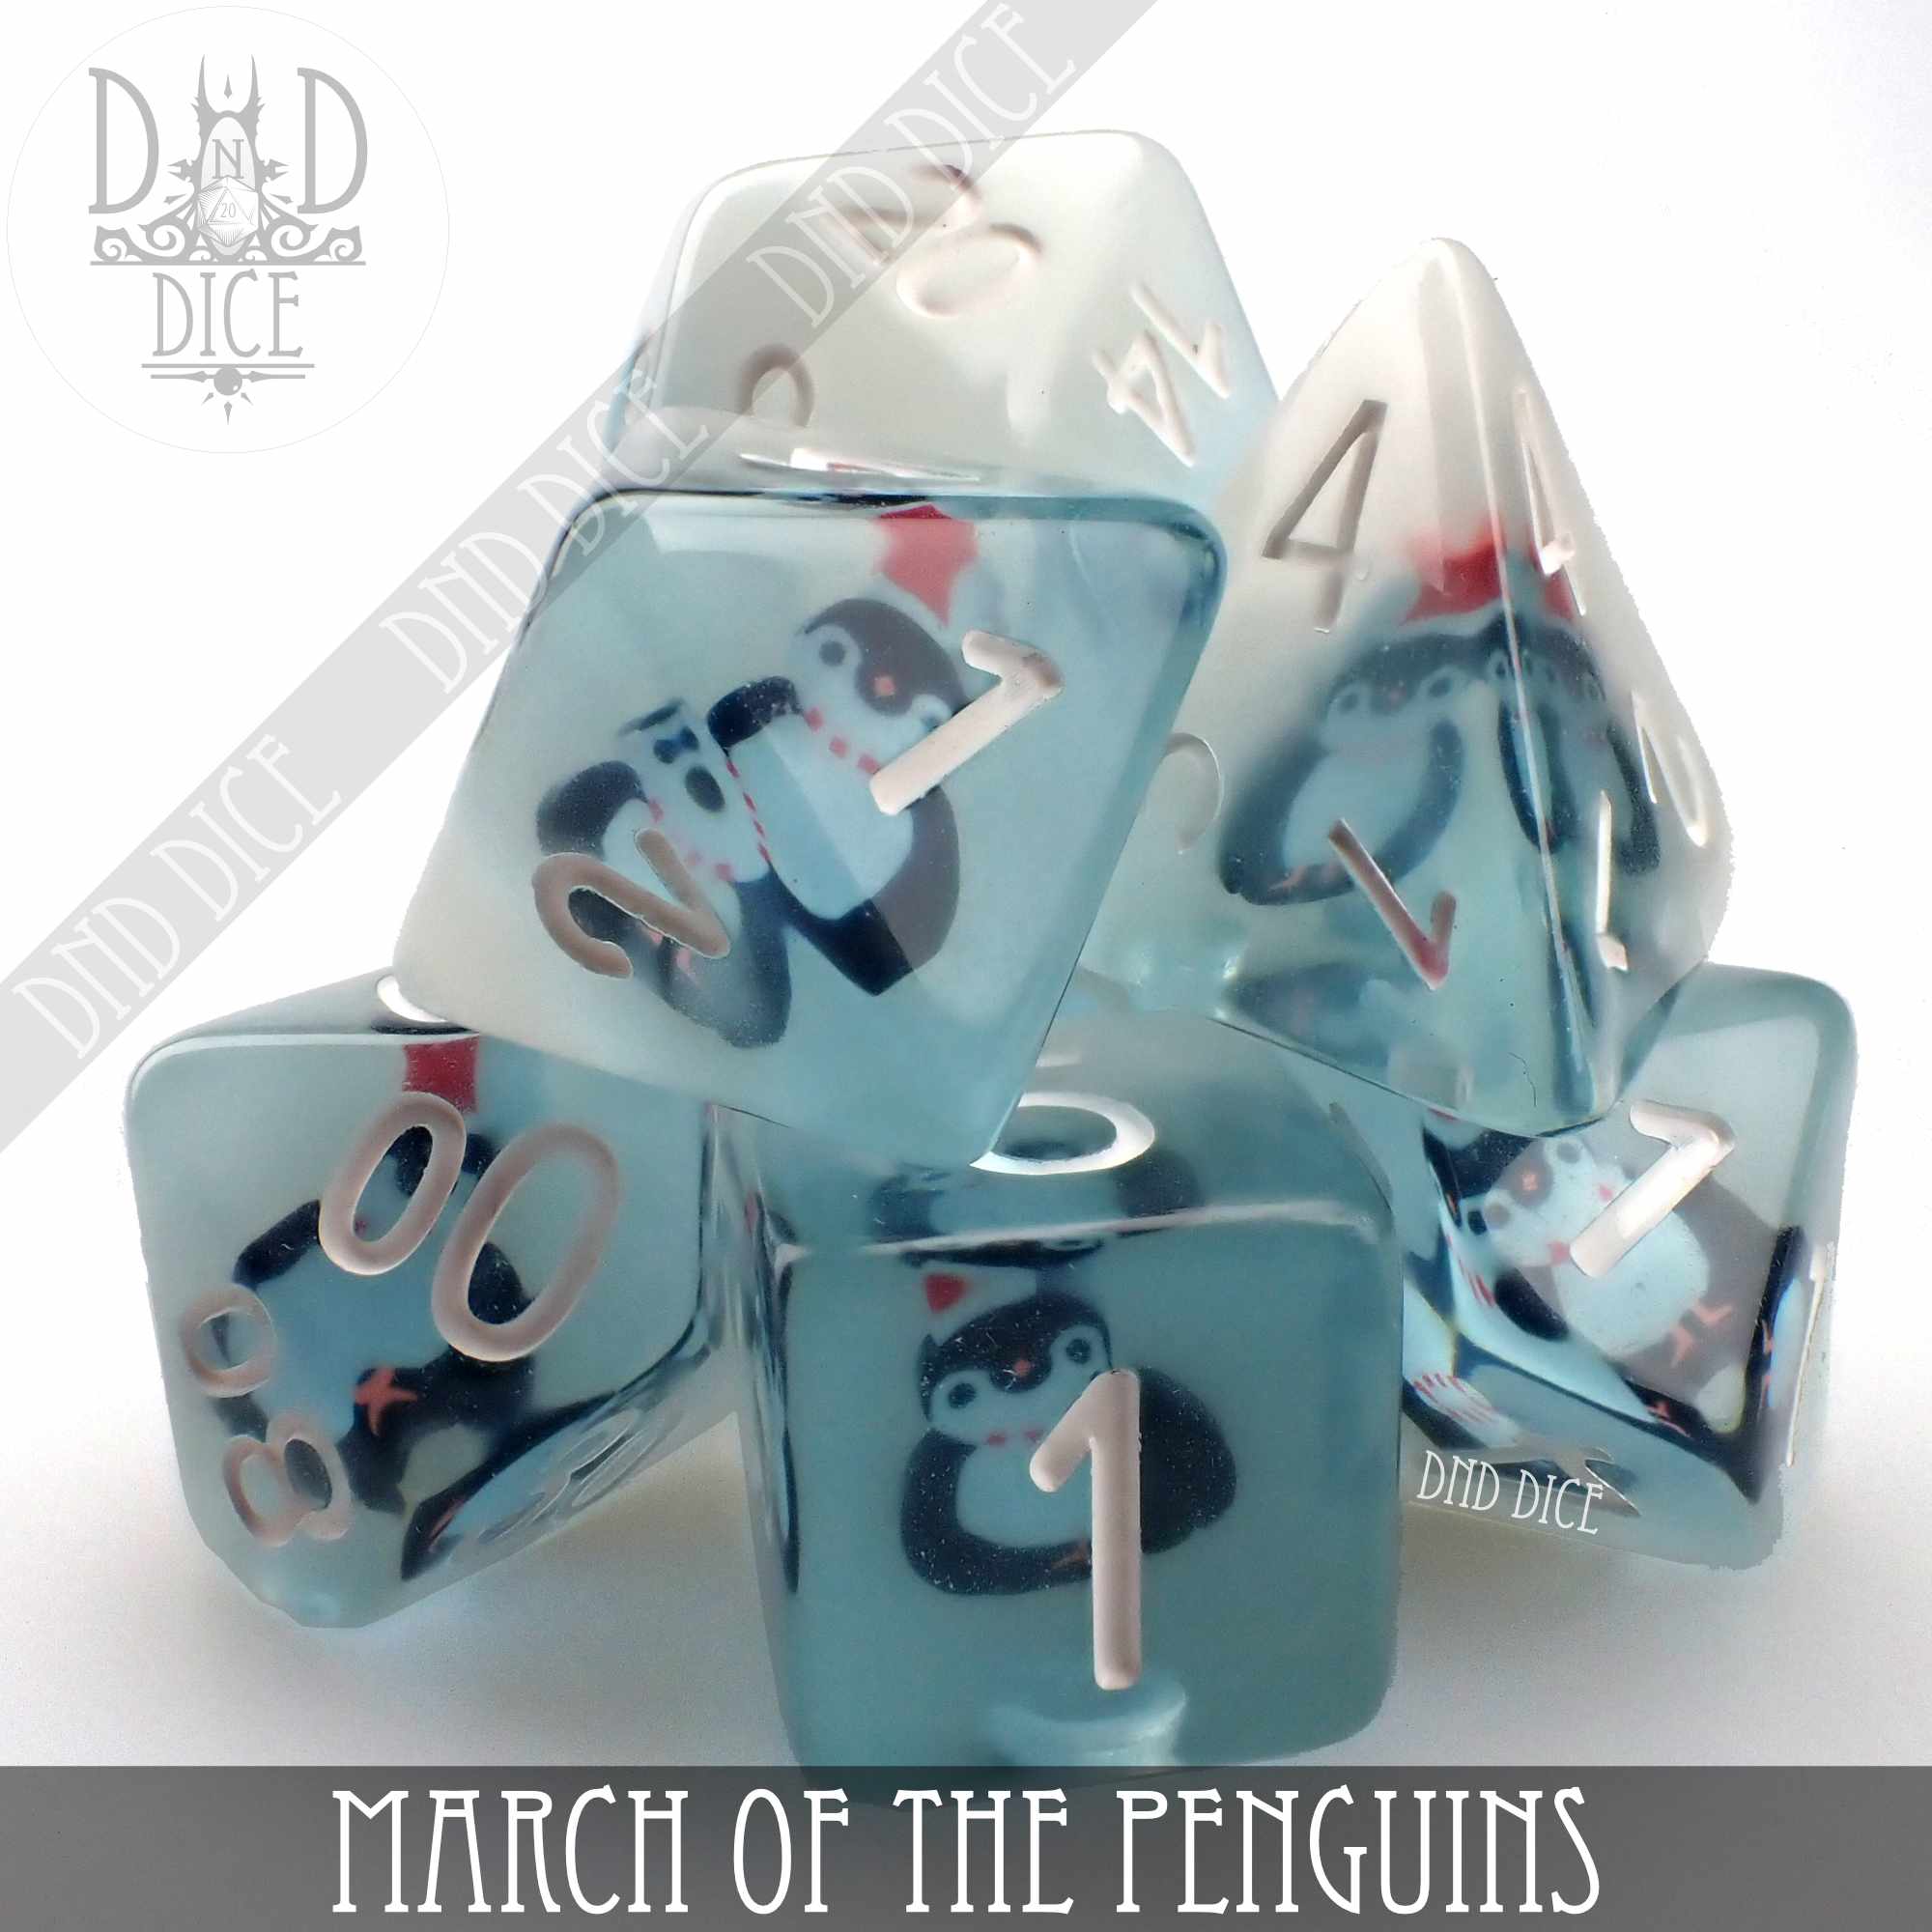 March of the Penguins Dice Set